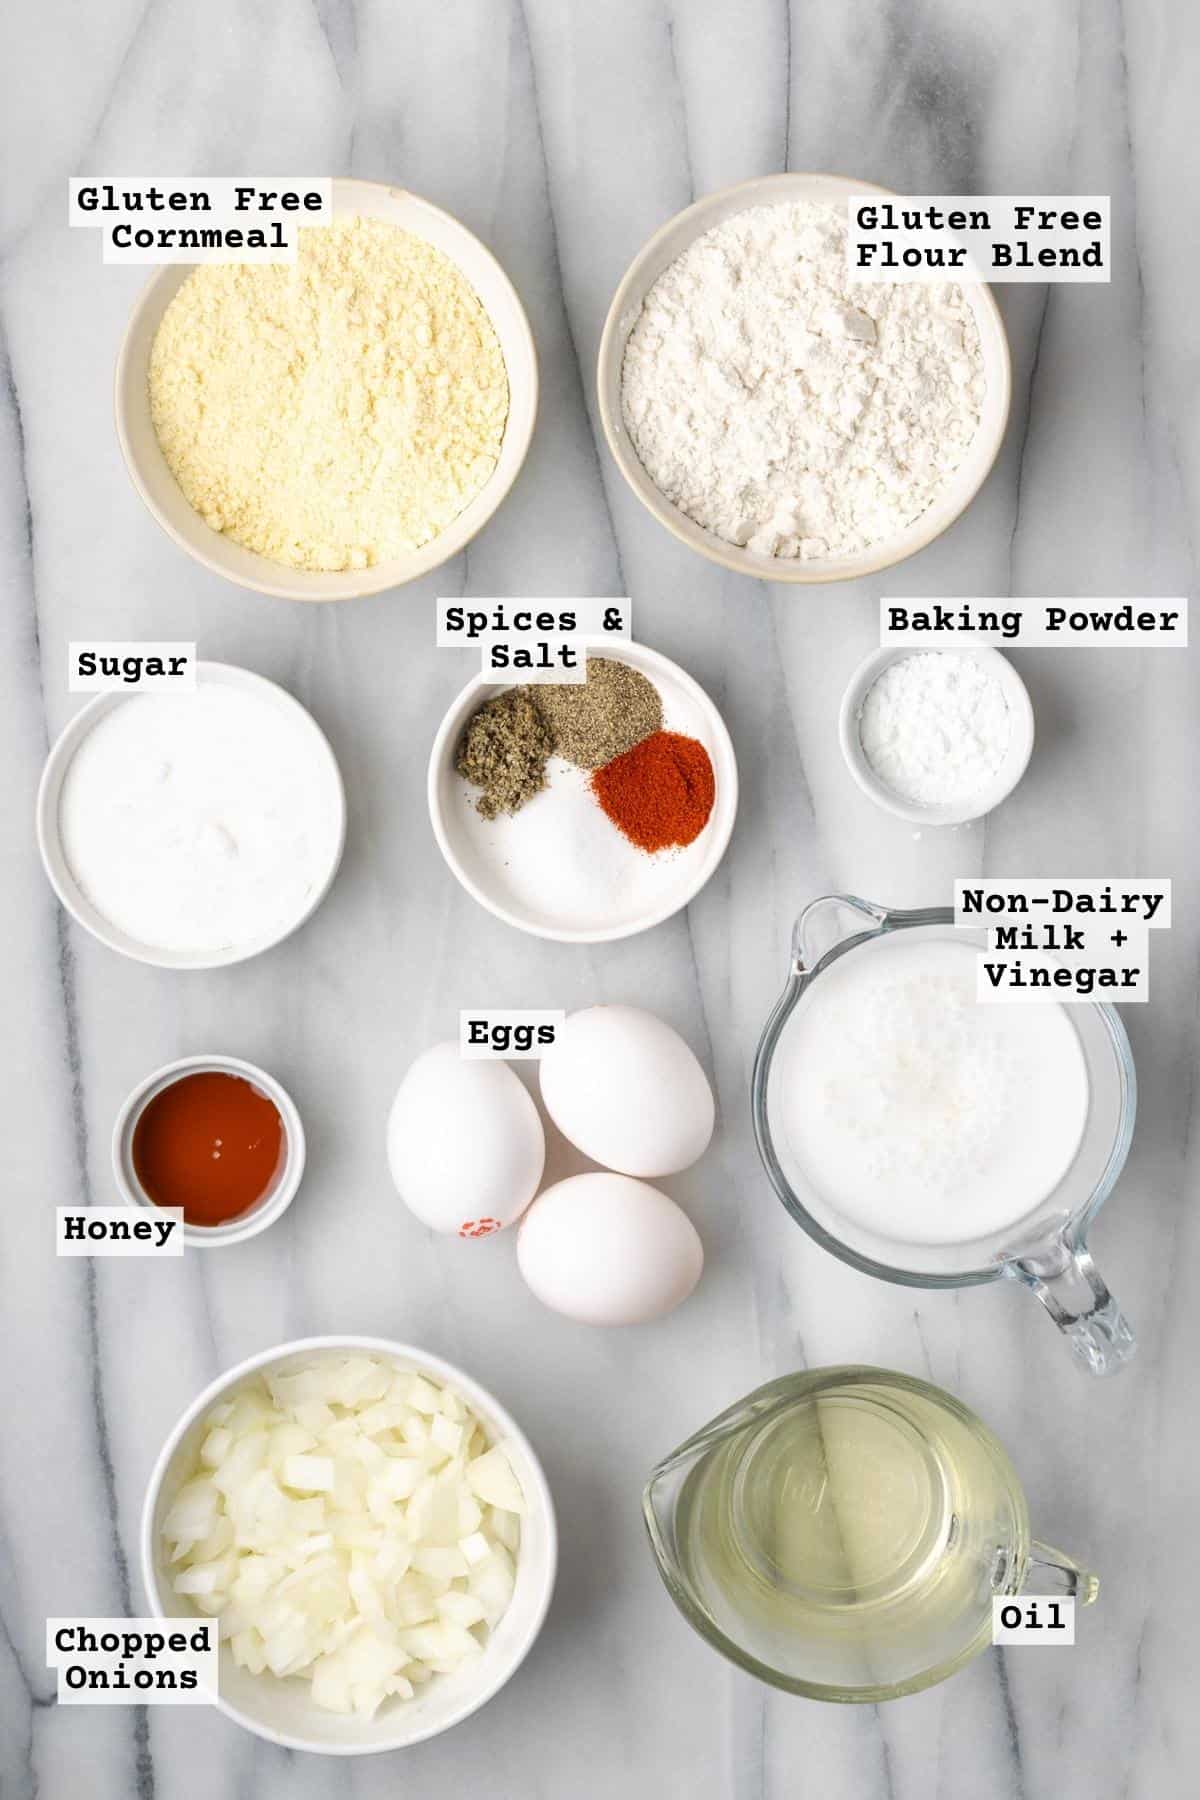 Ingredients for gluten free cornbread on a white marble table.